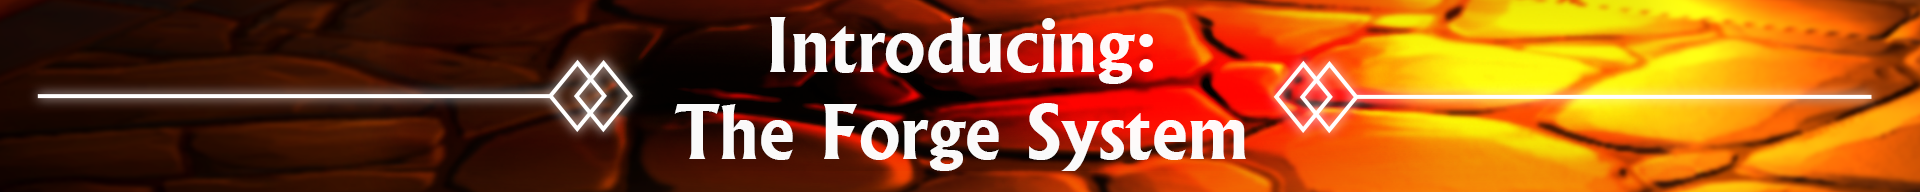 Introducing_Forge